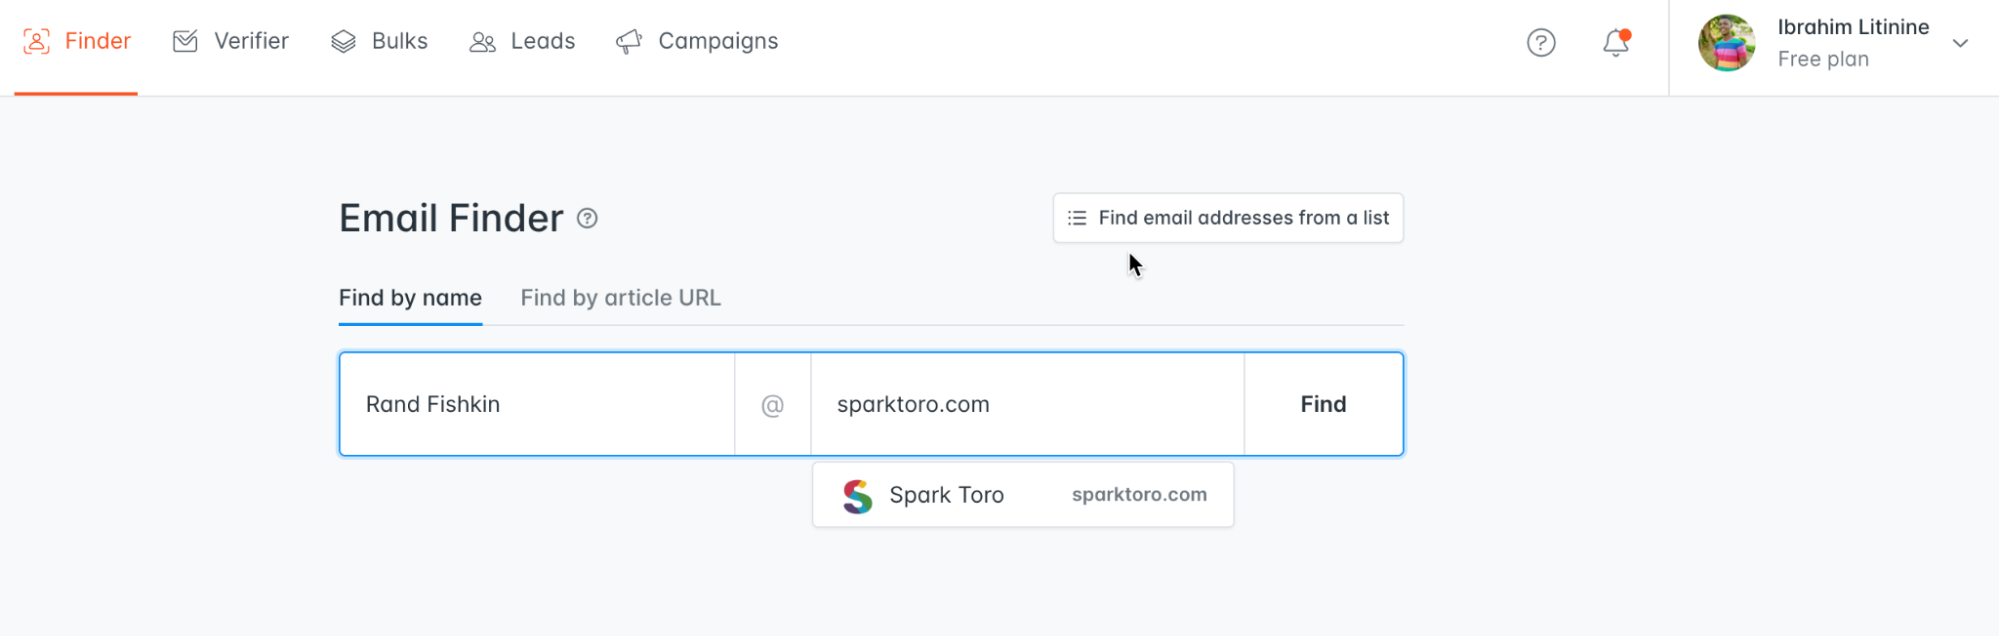 search email addresses with Hunter.io